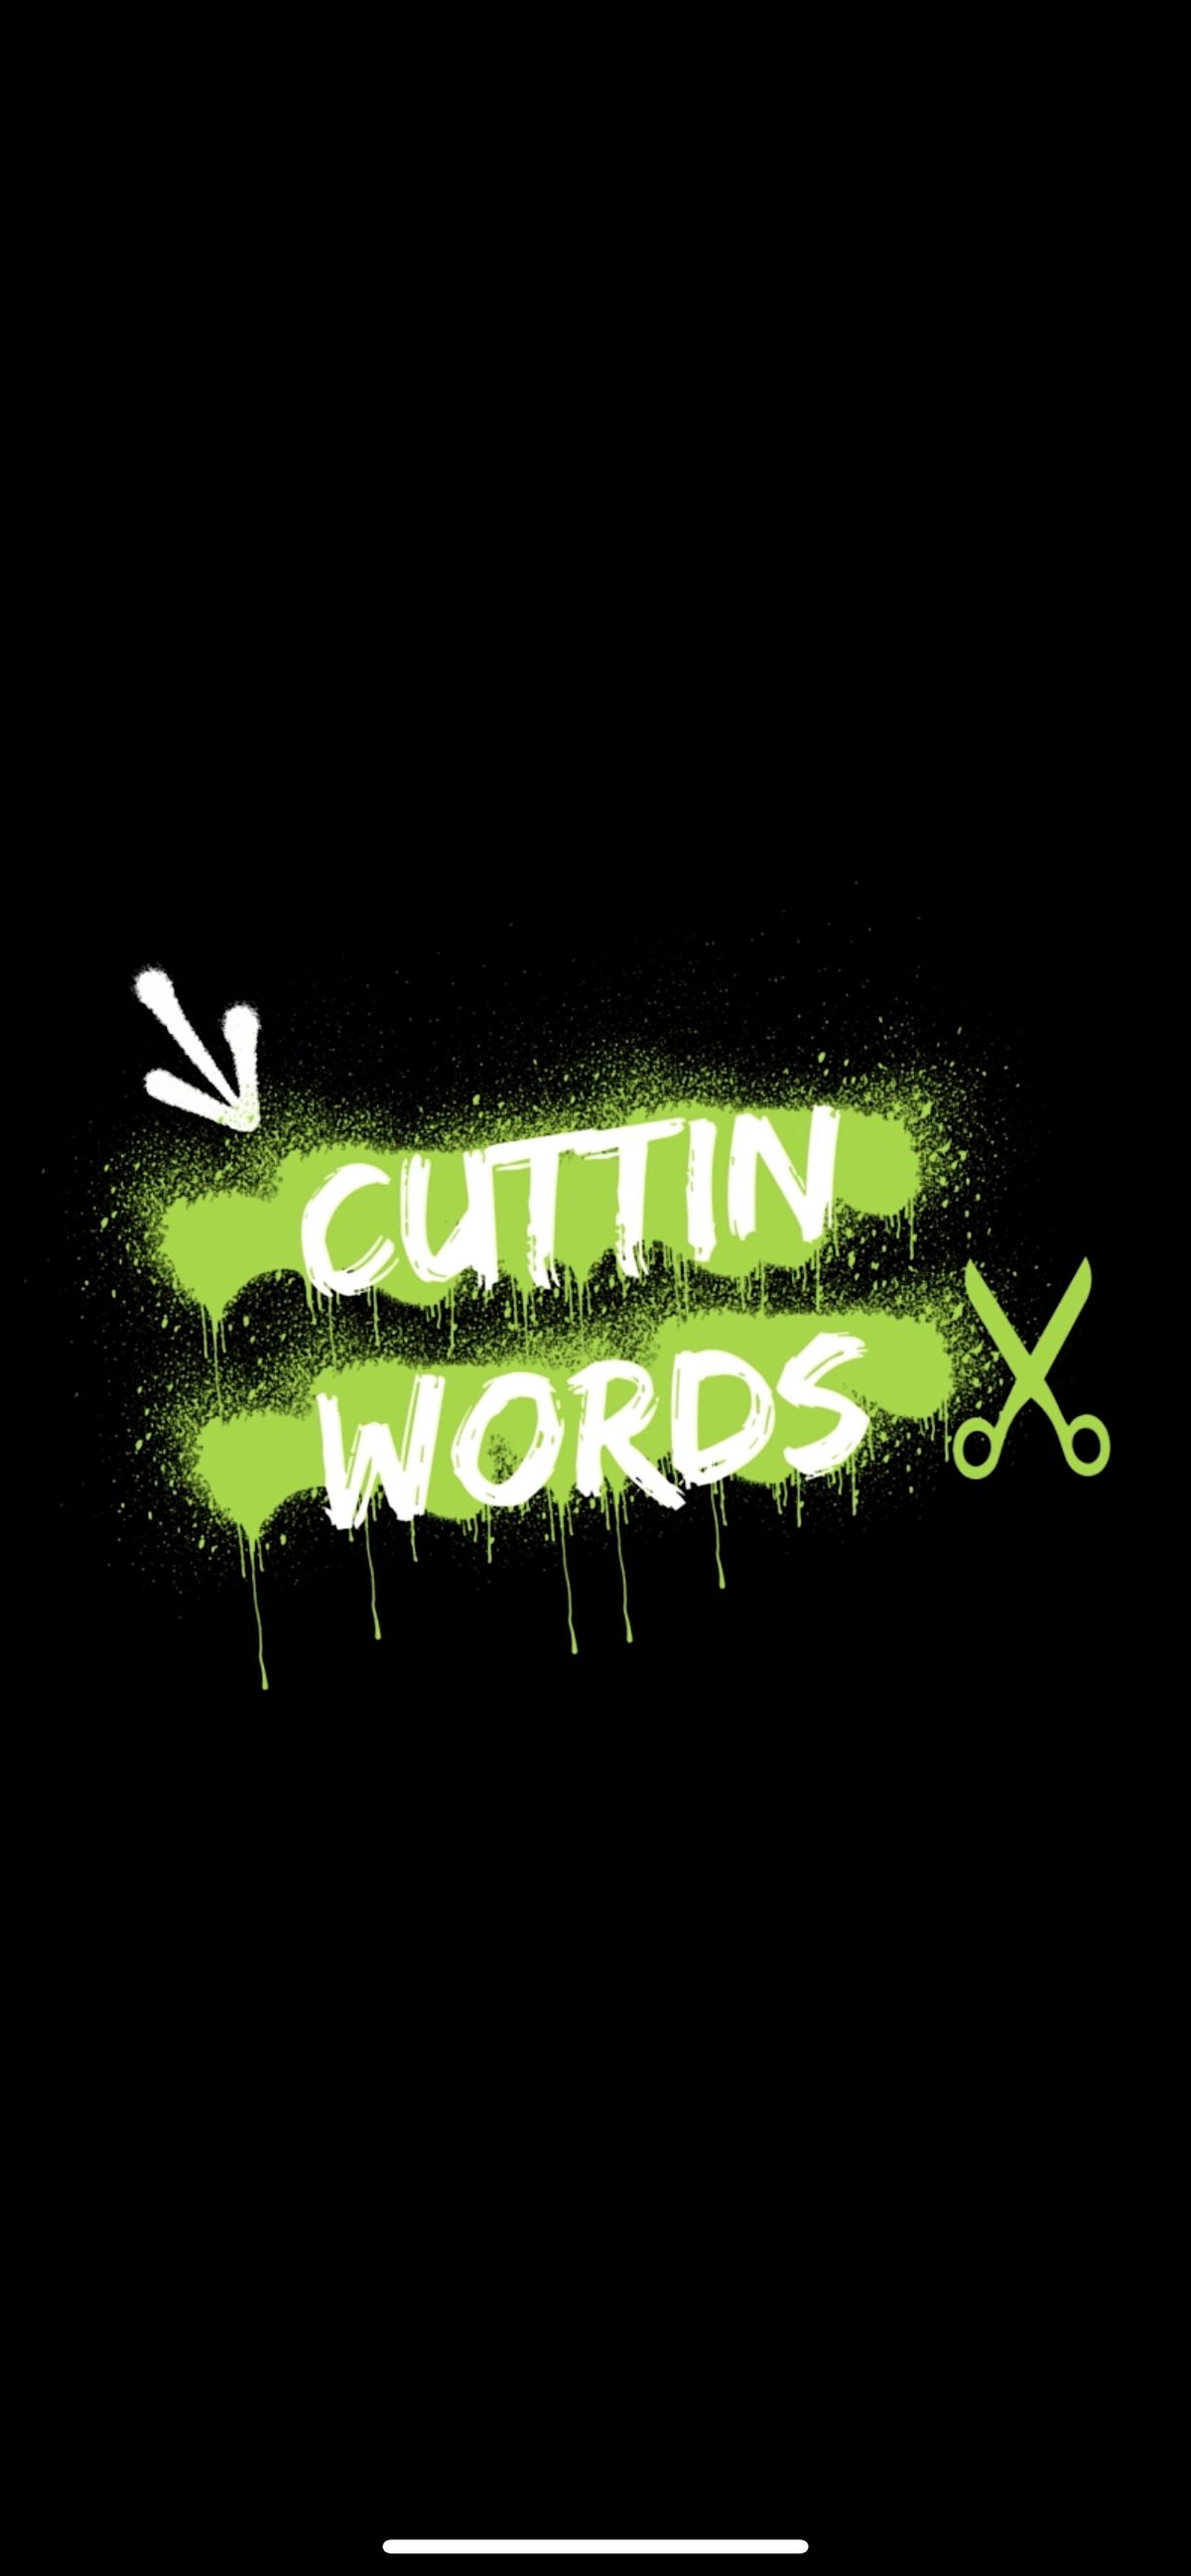 Poetry Place presents 'Cuttin Words 2'